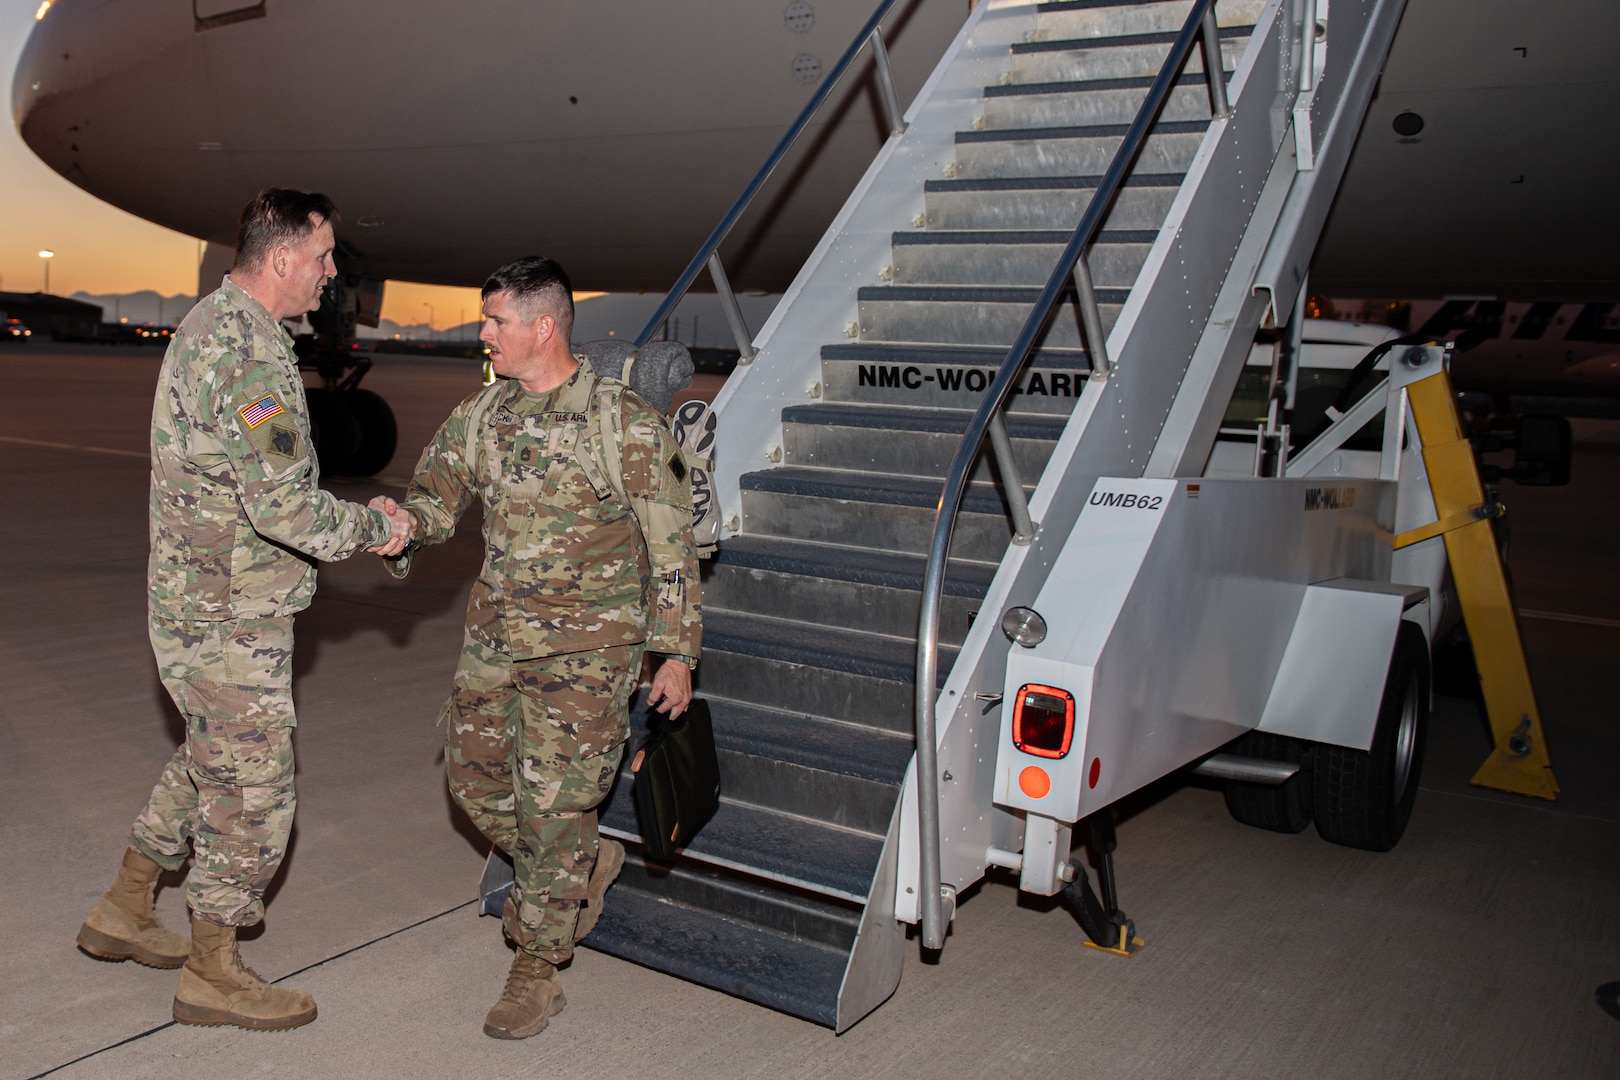 Col. Andrew Ballenger, commander, 45th Infantry Brigade Combat Team, Oklahoma Army National Guard, greets Sgt. 1st Class Matthew Peck at Fort Bliss, Texas, Feb. 18, 2024. Peck, along with other members of Task Force Tomahawk returned to Fort Bliss for demobilization after a nine-month deployment to the Horn of Africa. (Oklahoma National Guard photo by Anthony Jones)